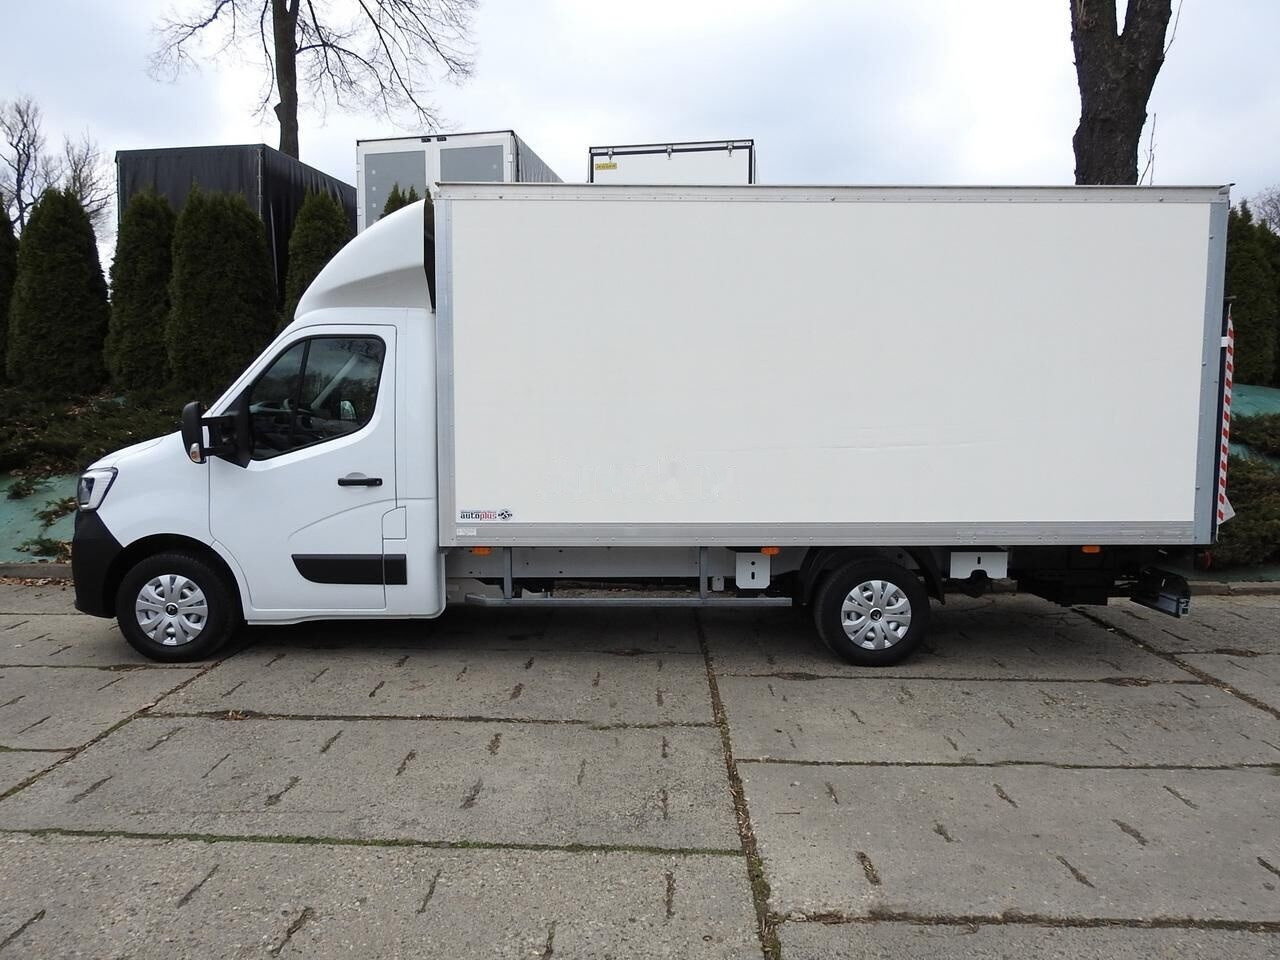 Fourgon grand volume Renault Koffer + tail lift: photos 5